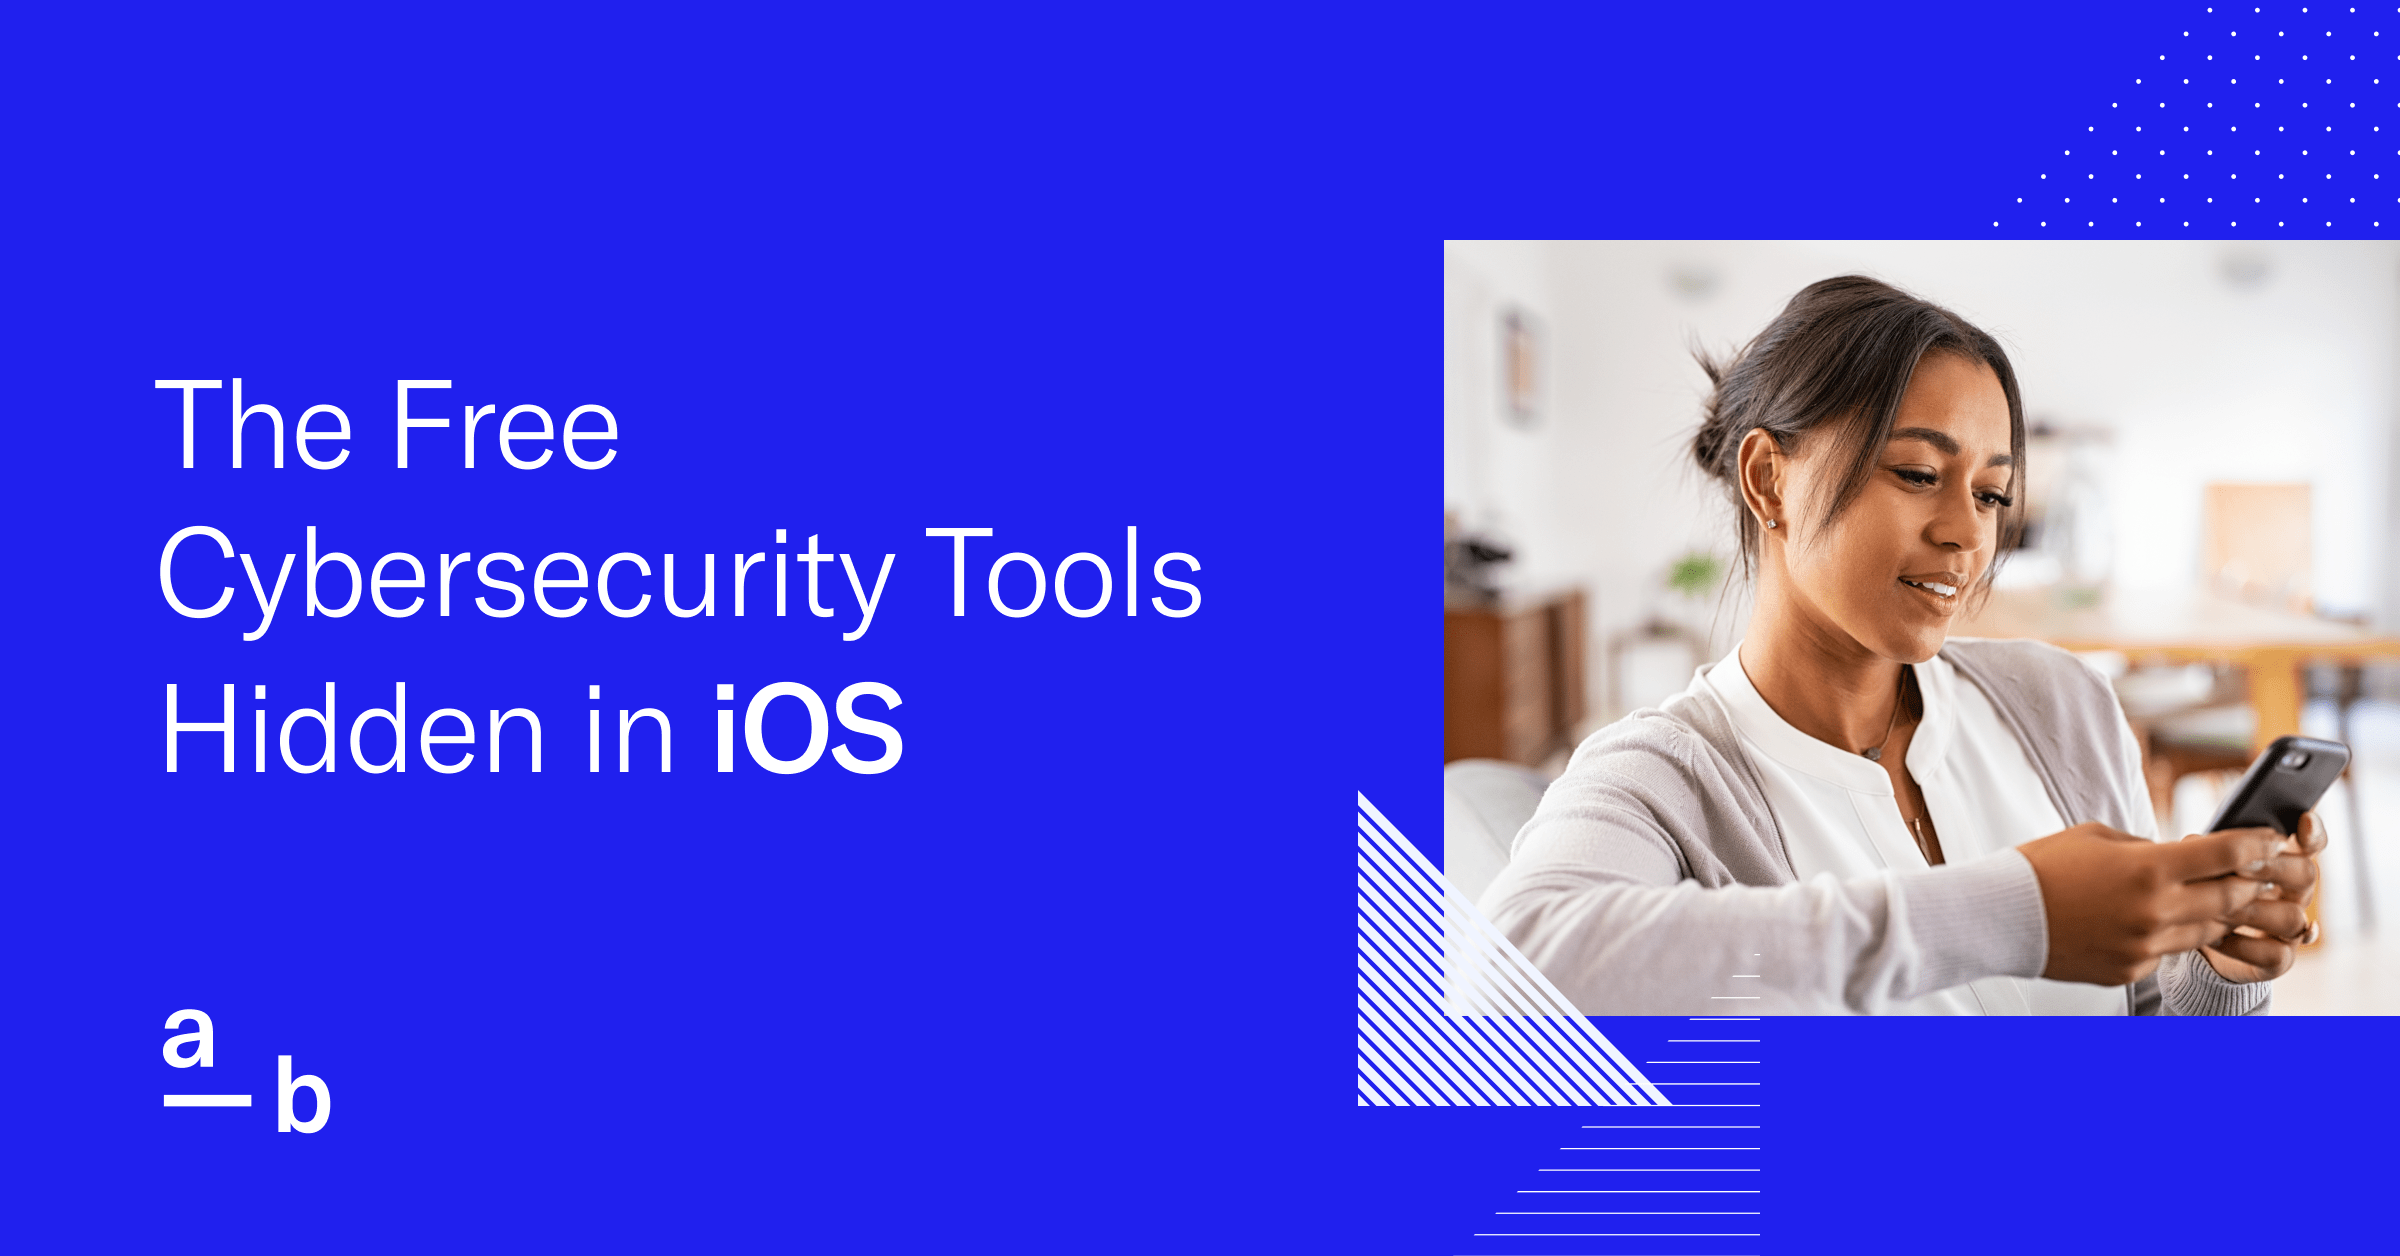 The Free Cybersecurity Tools Hidden in iOS